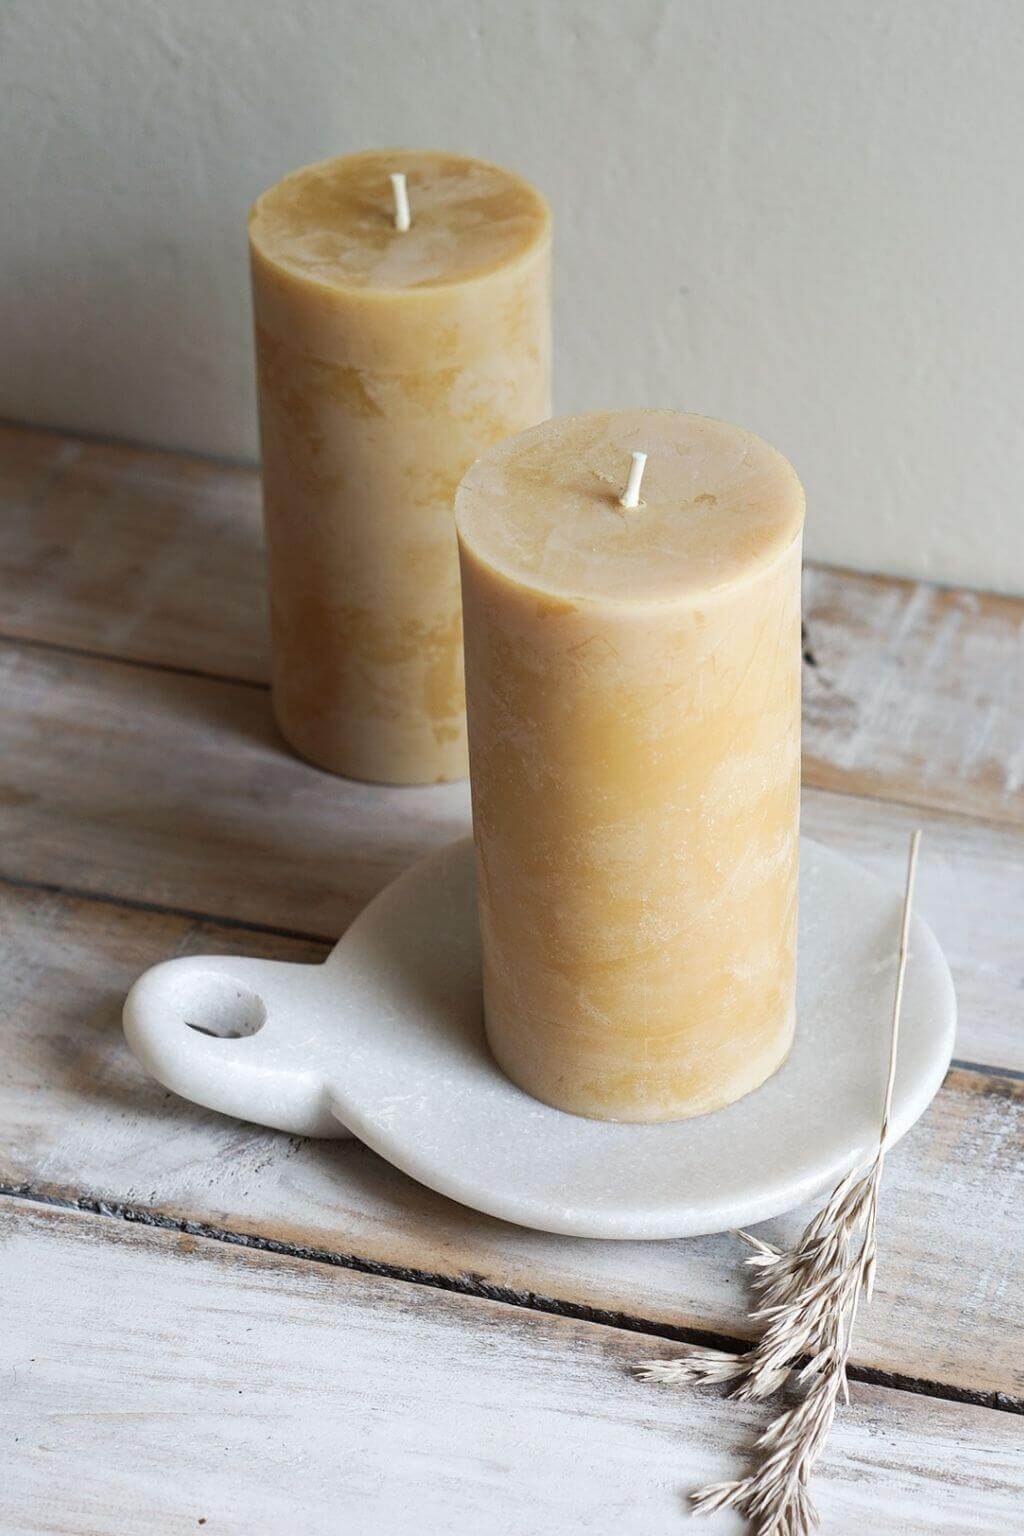 3 Inch Wide Beeswax Pillar Candles - Beverly Bees